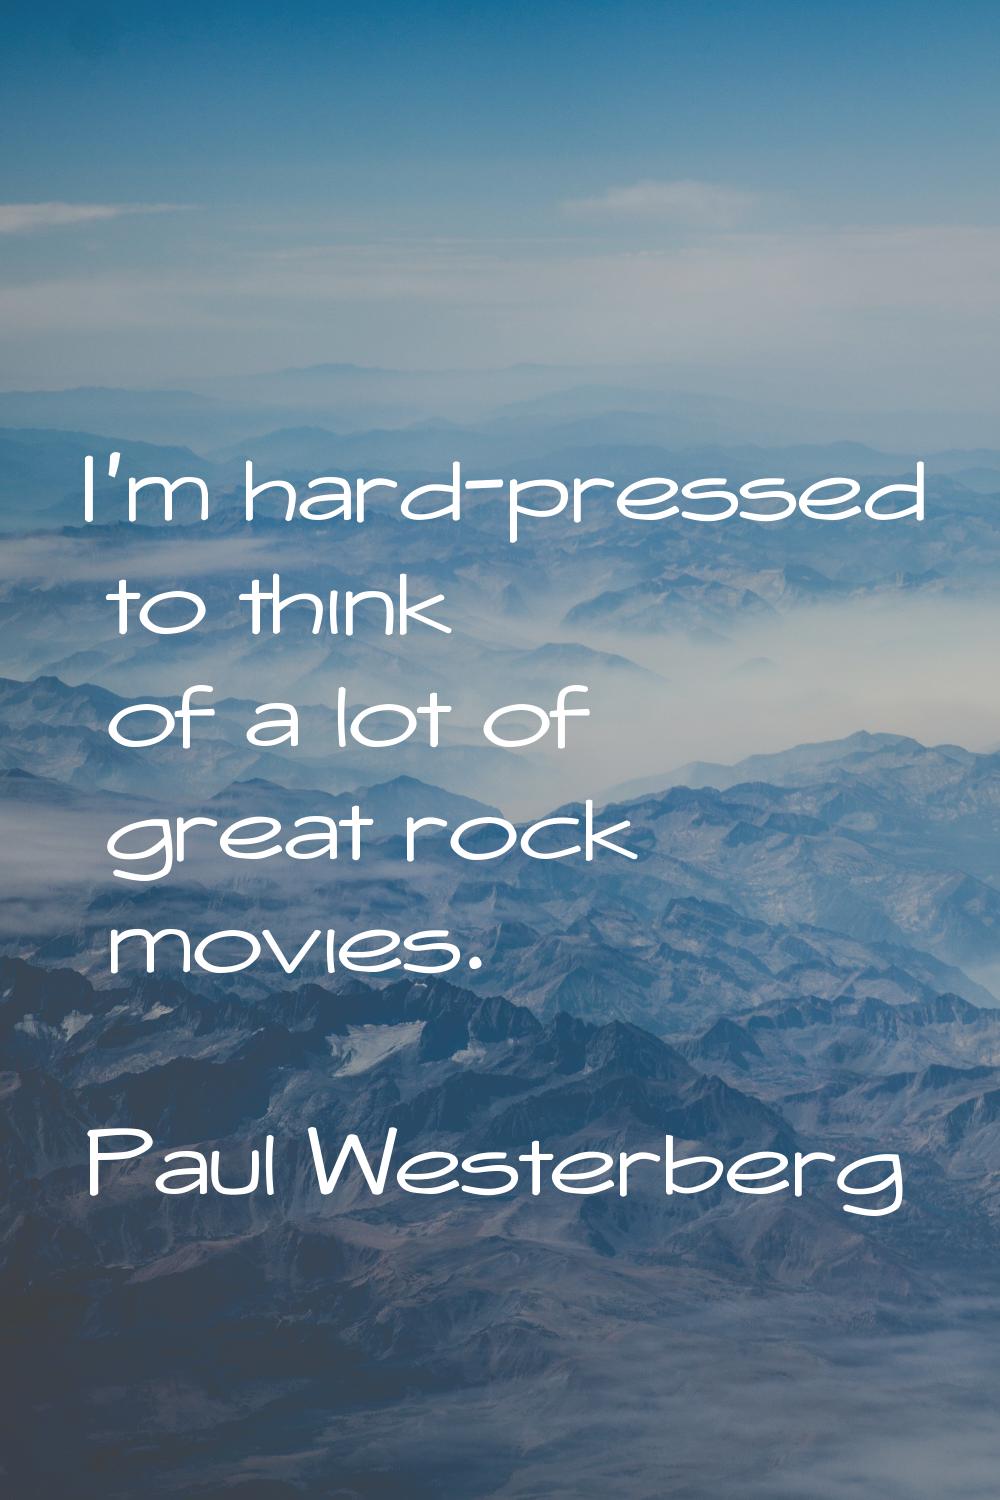 I'm hard-pressed to think of a lot of great rock movies.